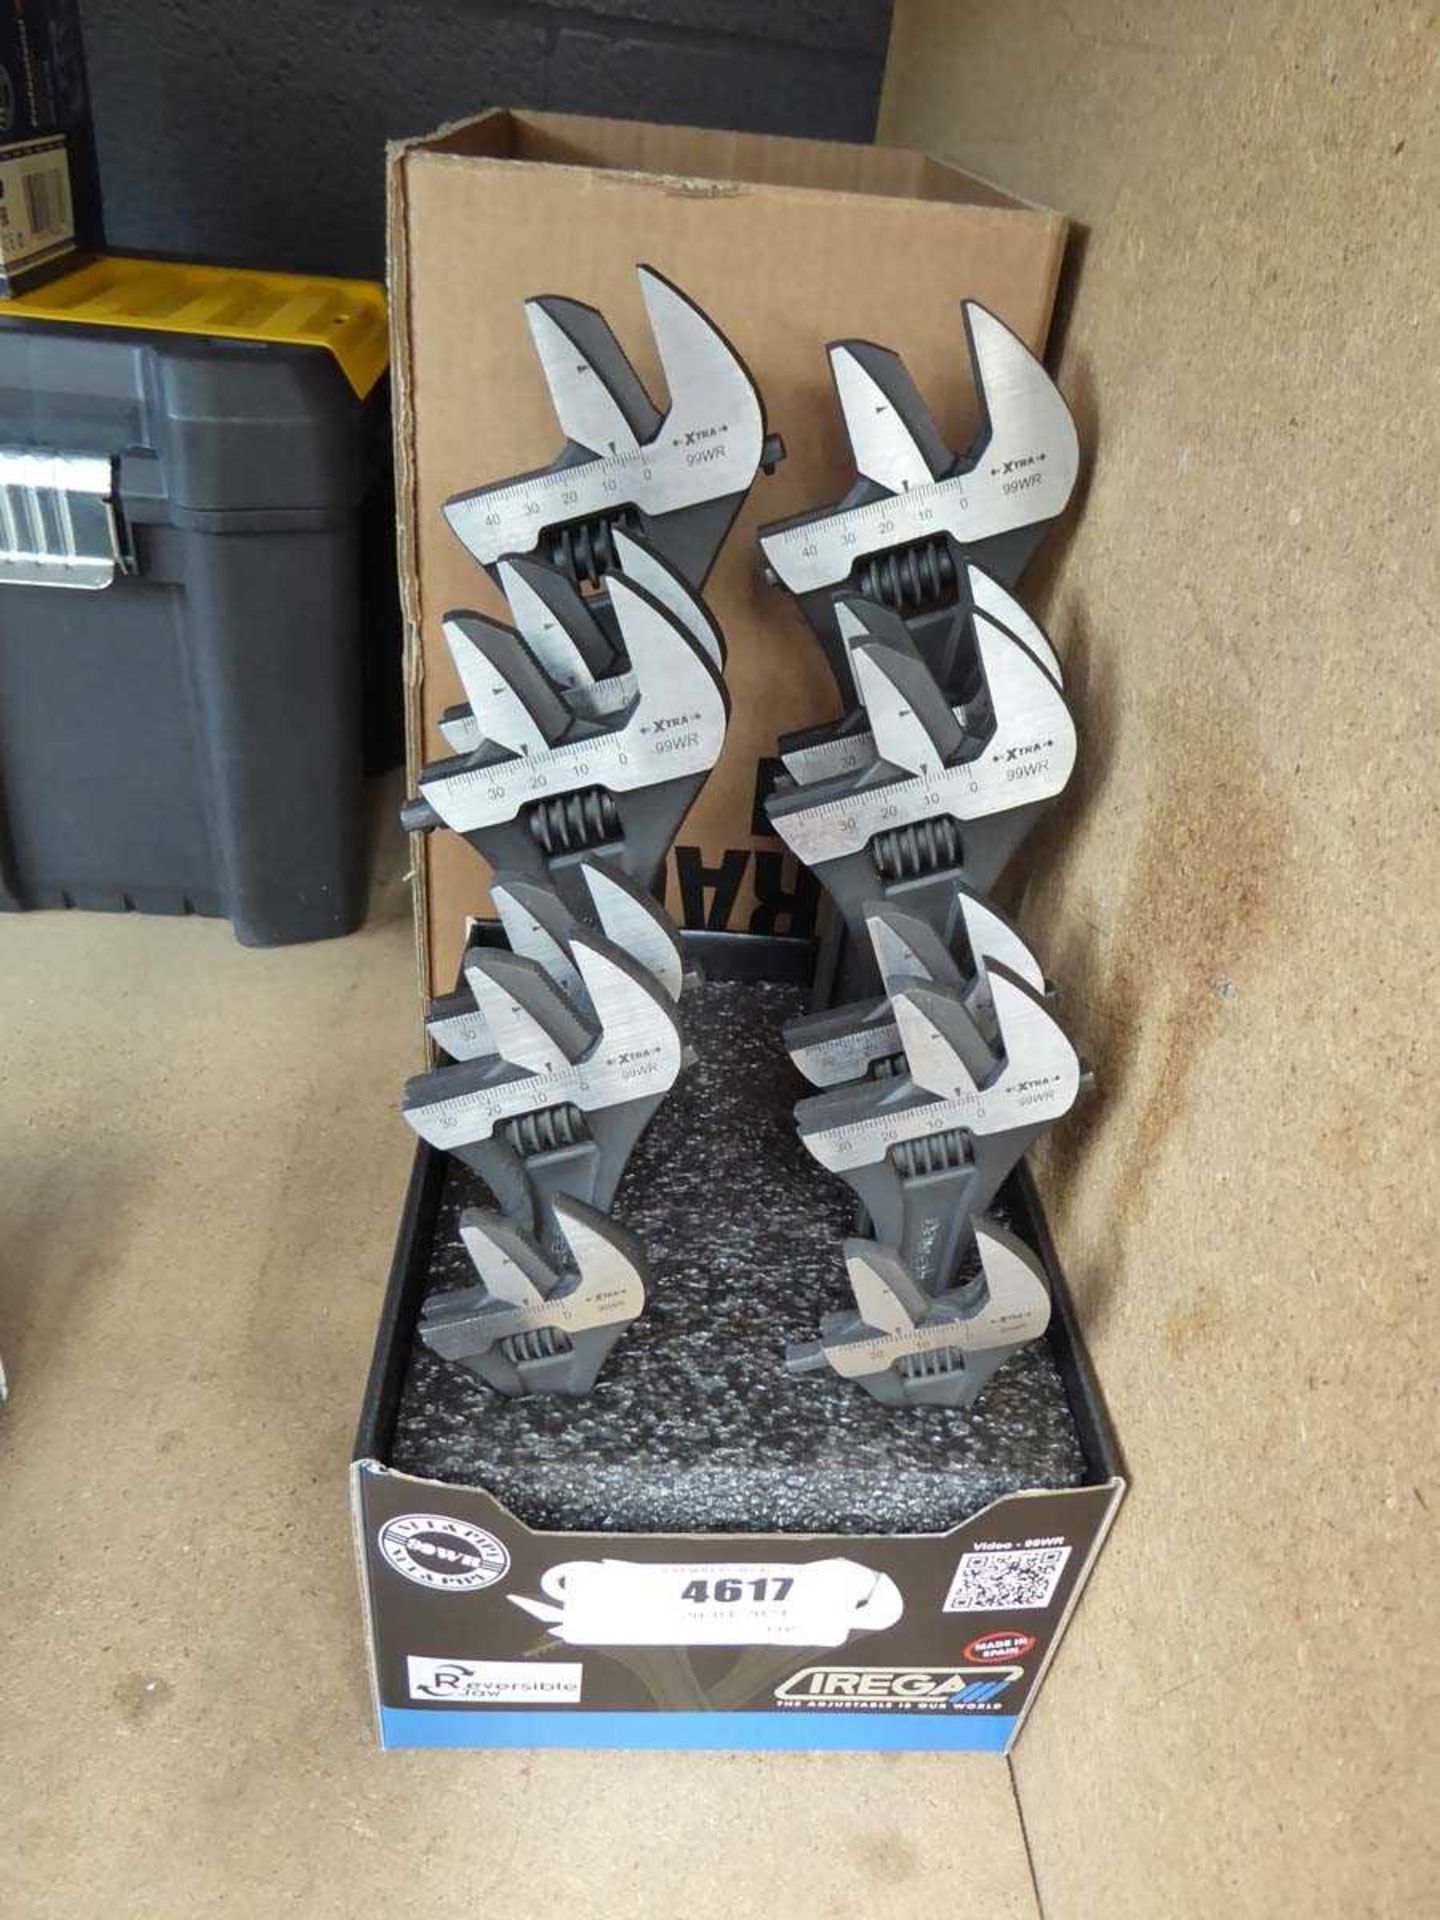 +VAT Box containing 12 Irega double scale adjustable spanners